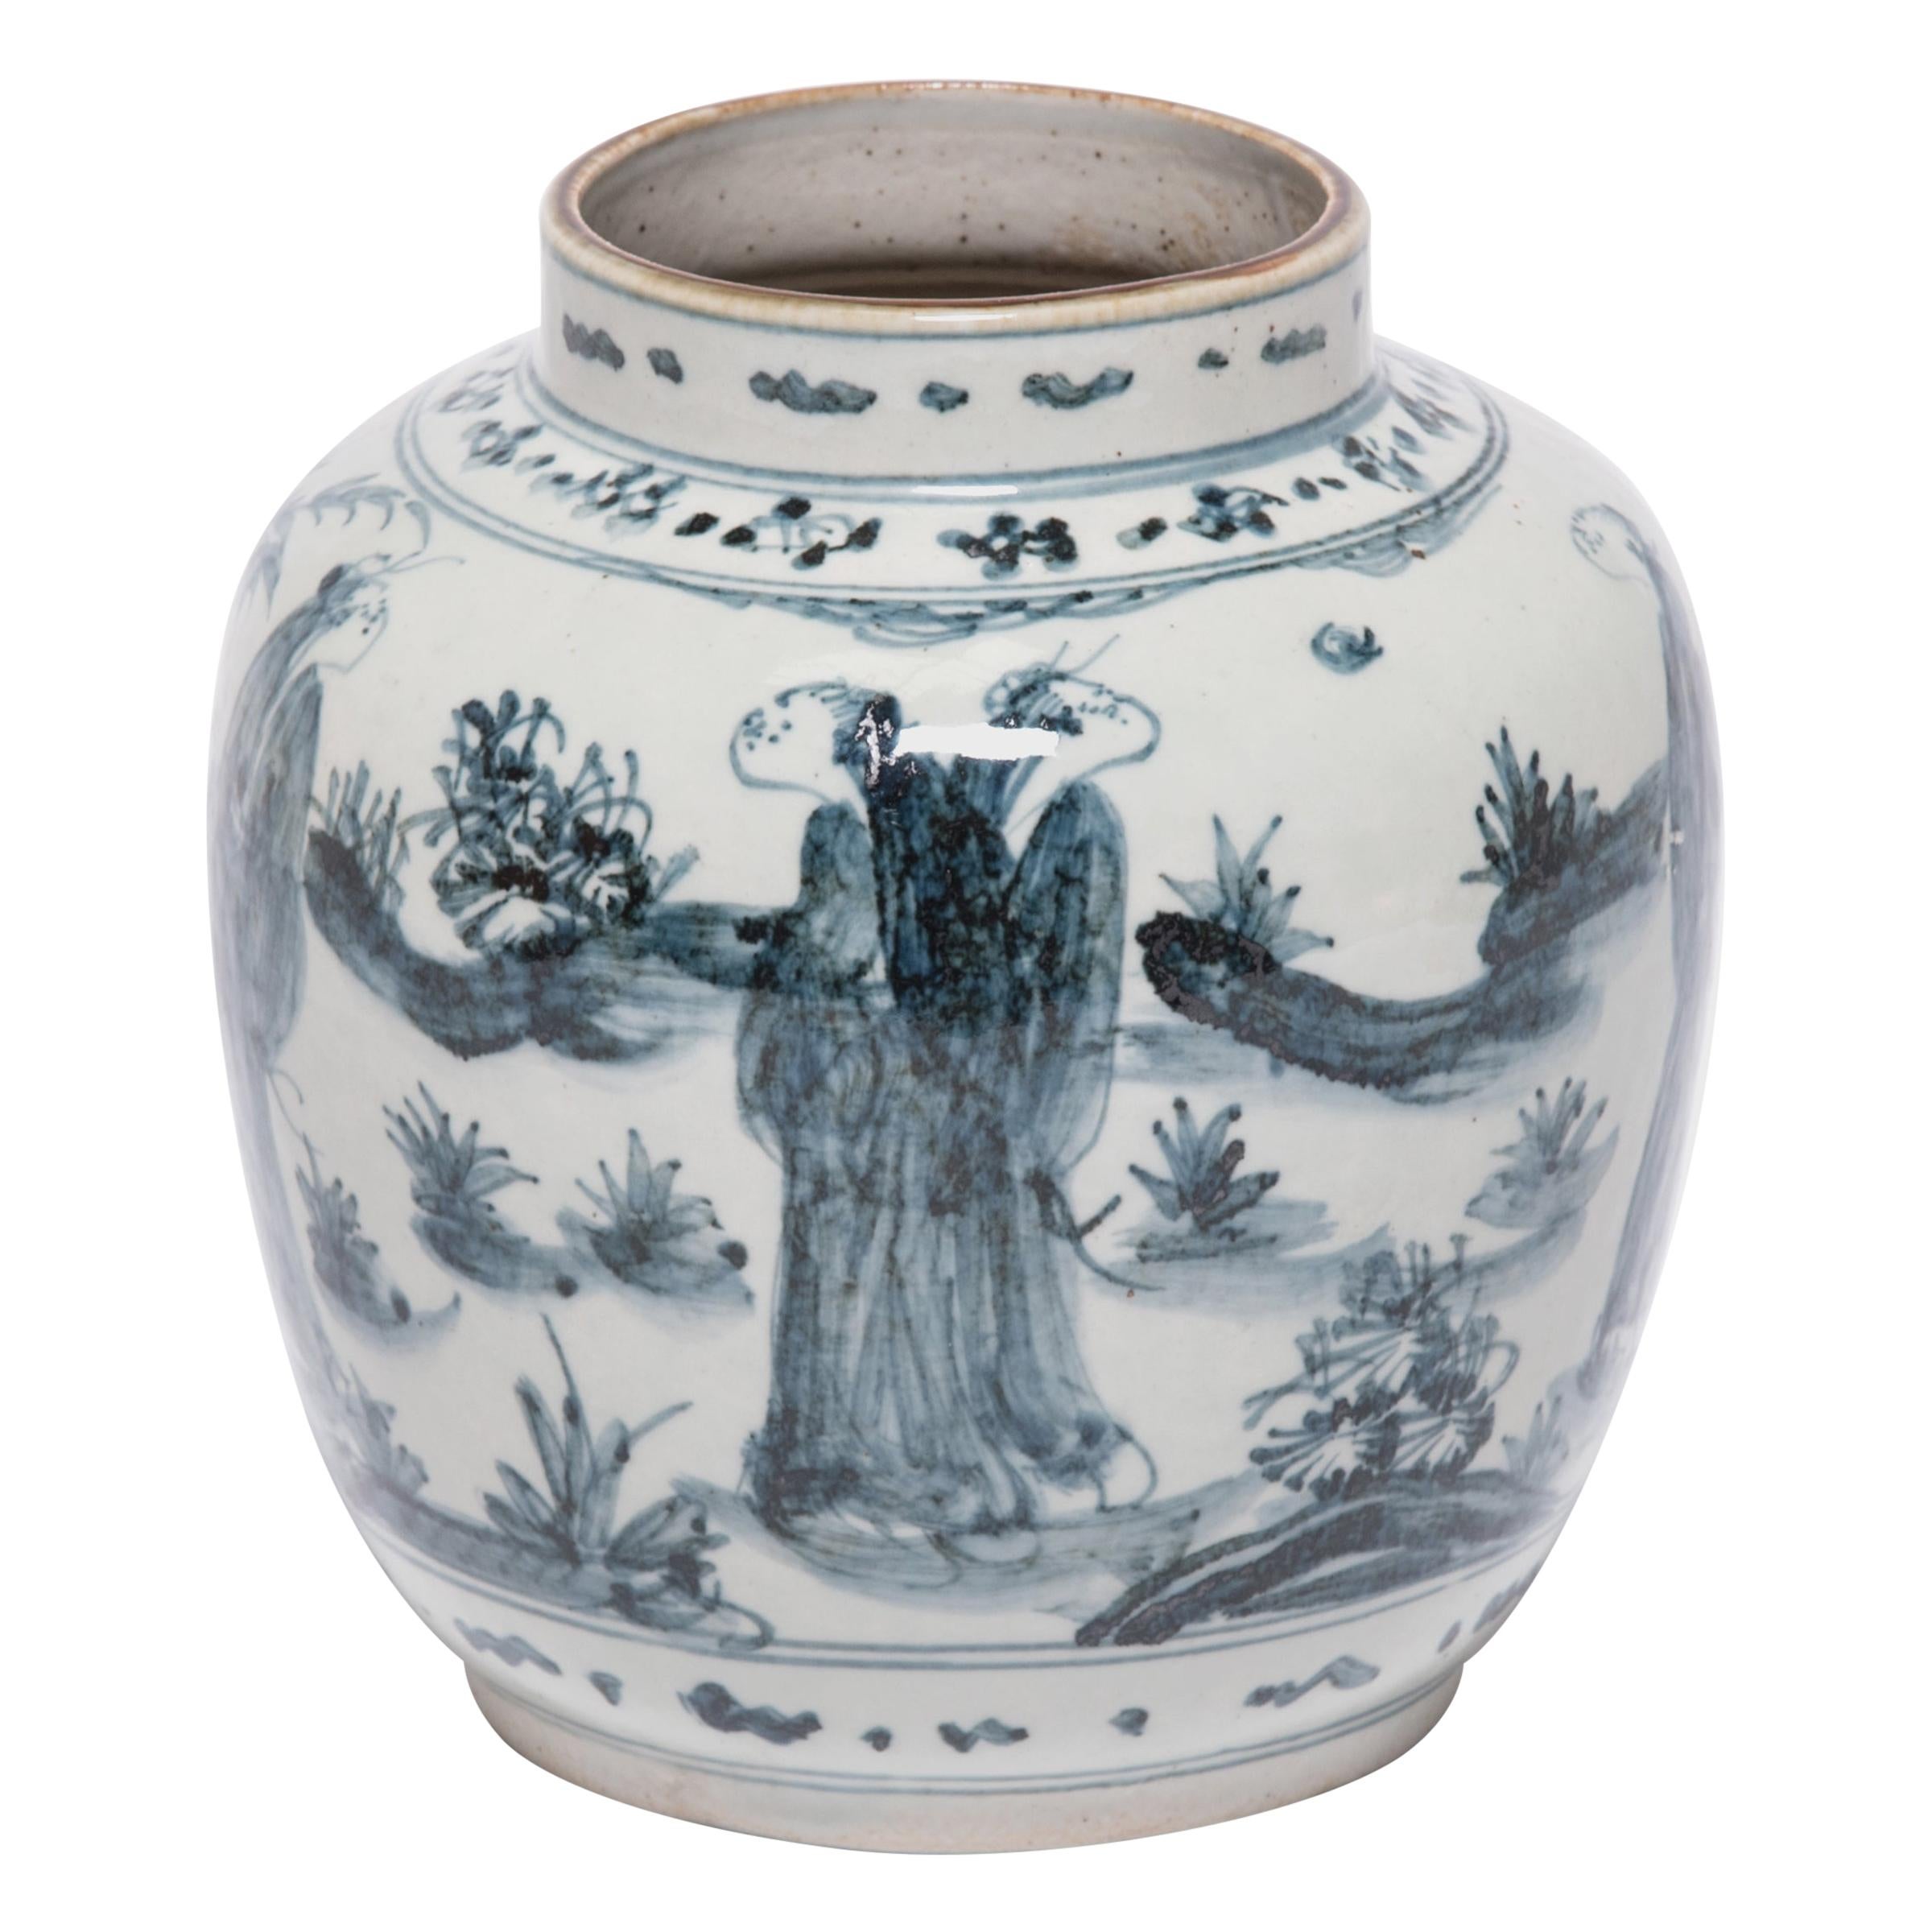 "Scholars in the Garden" Chinese Blue and White Jar